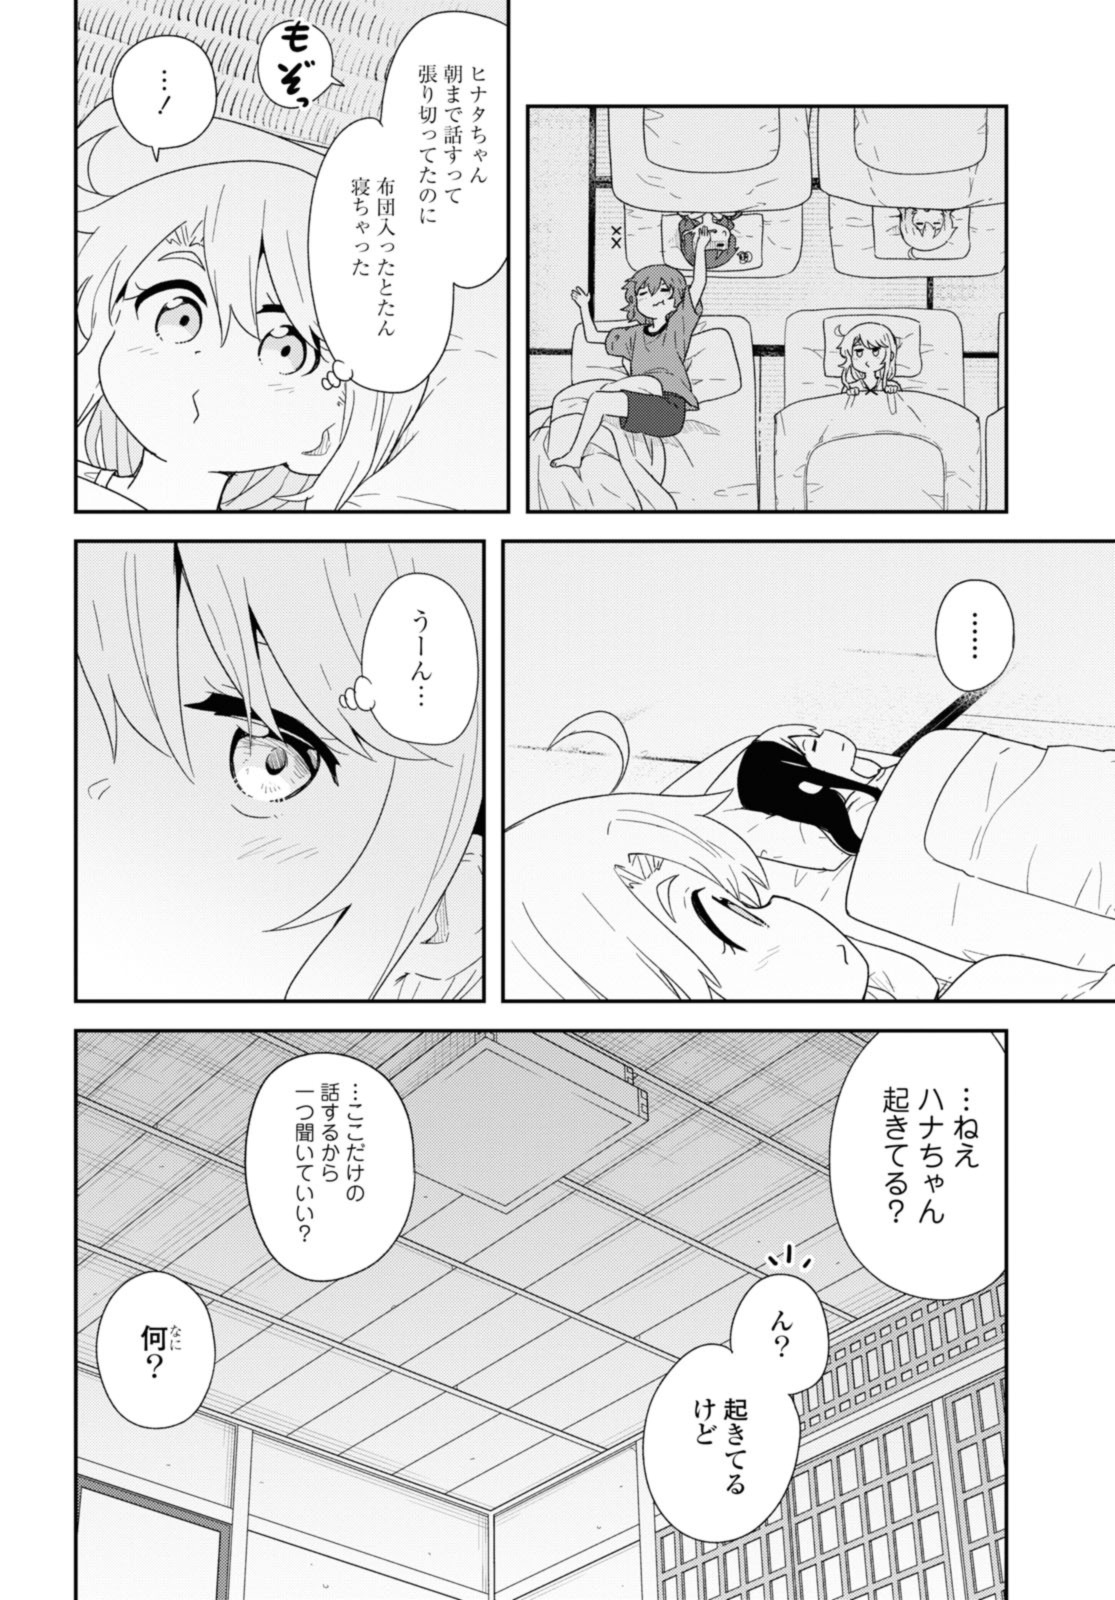 Wataten! An Angel Flew Down to Me 私に天使が舞い降りた！ 第106話 - Page 12